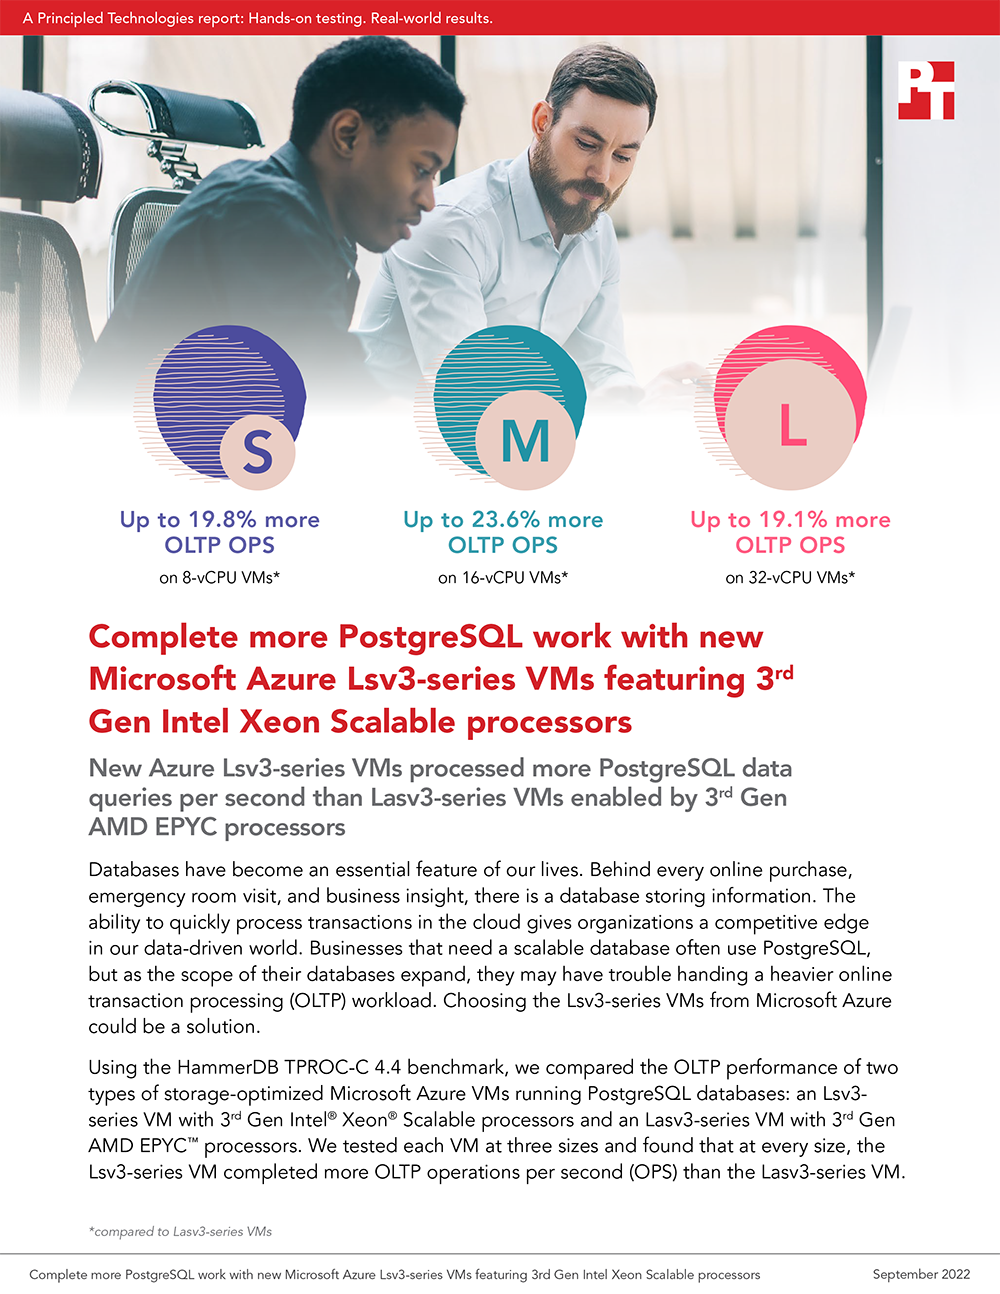 Principled Technologies Releases Report Showing Azure Lsv3-Series VMs Completed More PostgreSQL OLTP Work Than Lasv3-Series VMs